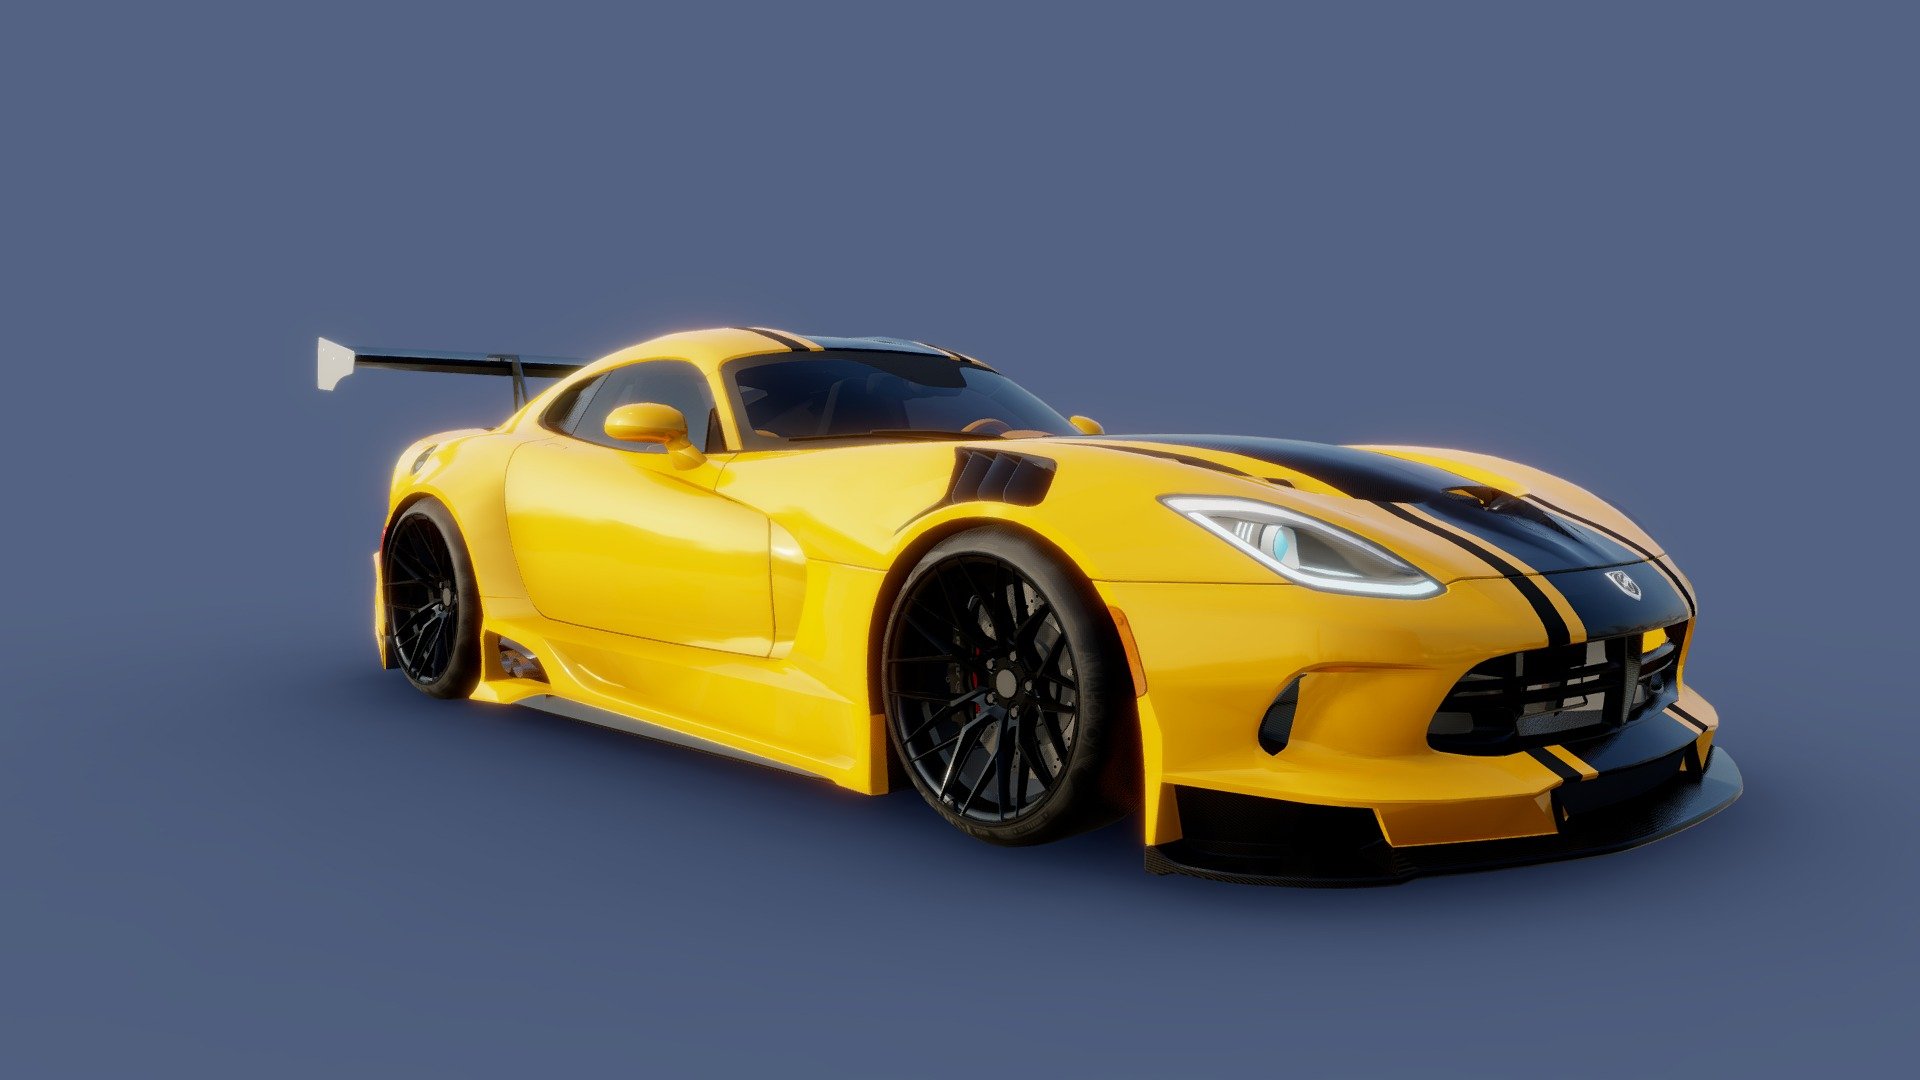 Could you please consider liking and subscribing to my account. Your support would mean a lot to me. Thank you! - 3d model Viper - Buy Royalty Free 3D model by zizian 3d model